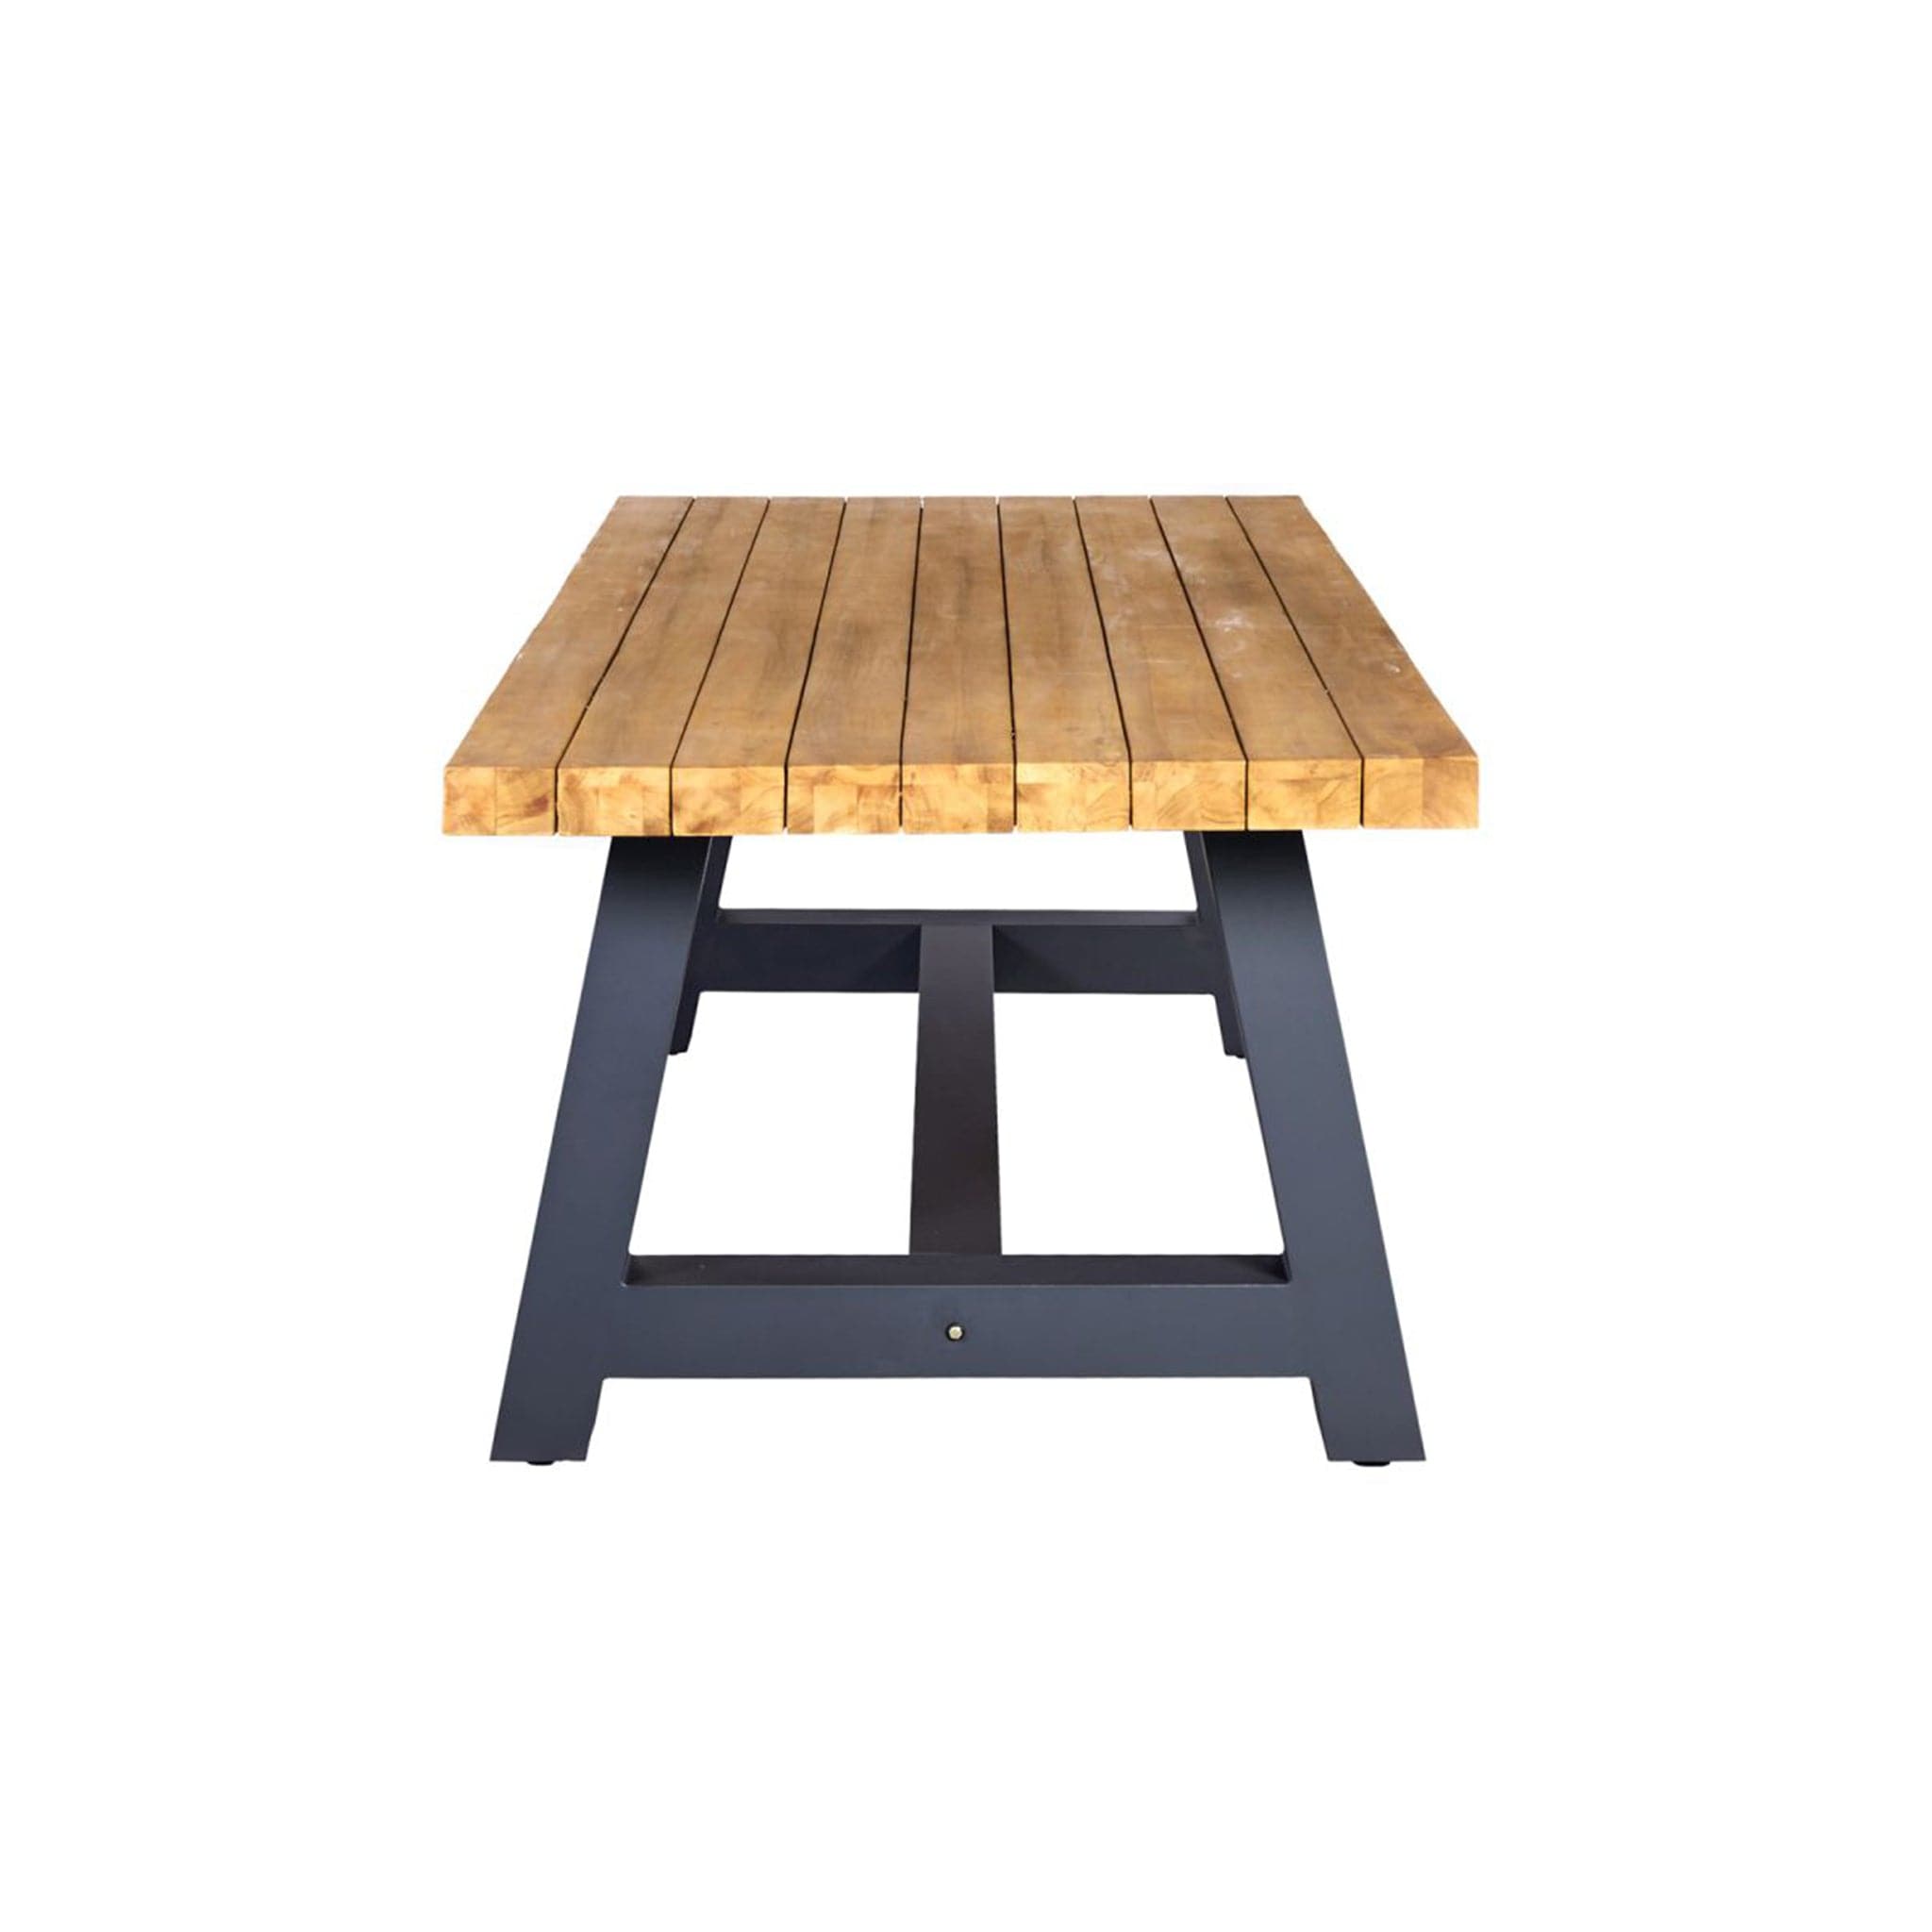 Mill 8 Seat Reclaimed Teak Outdoor Dining Table